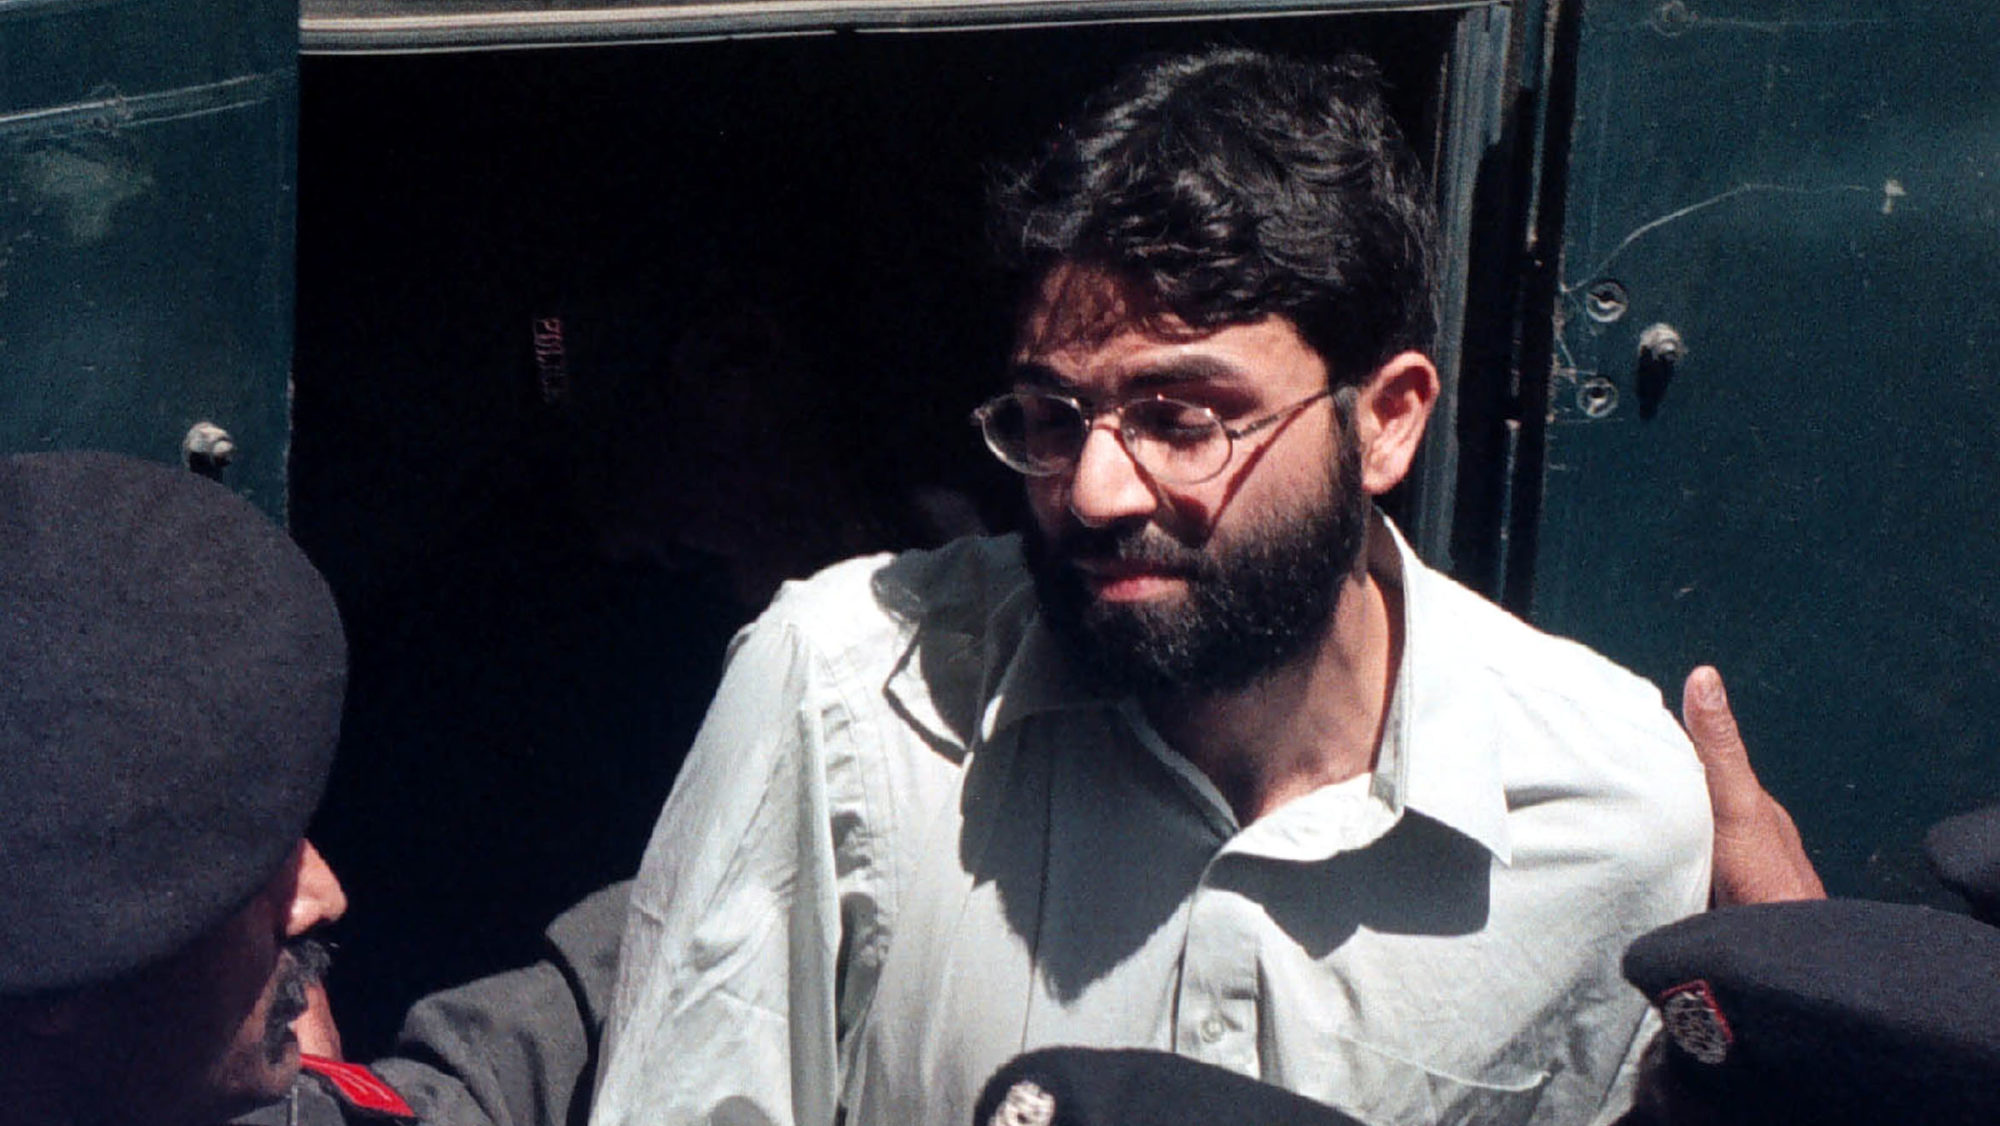 Pakistan To Review Release of Daniel Pearl’s Alleged Murderers